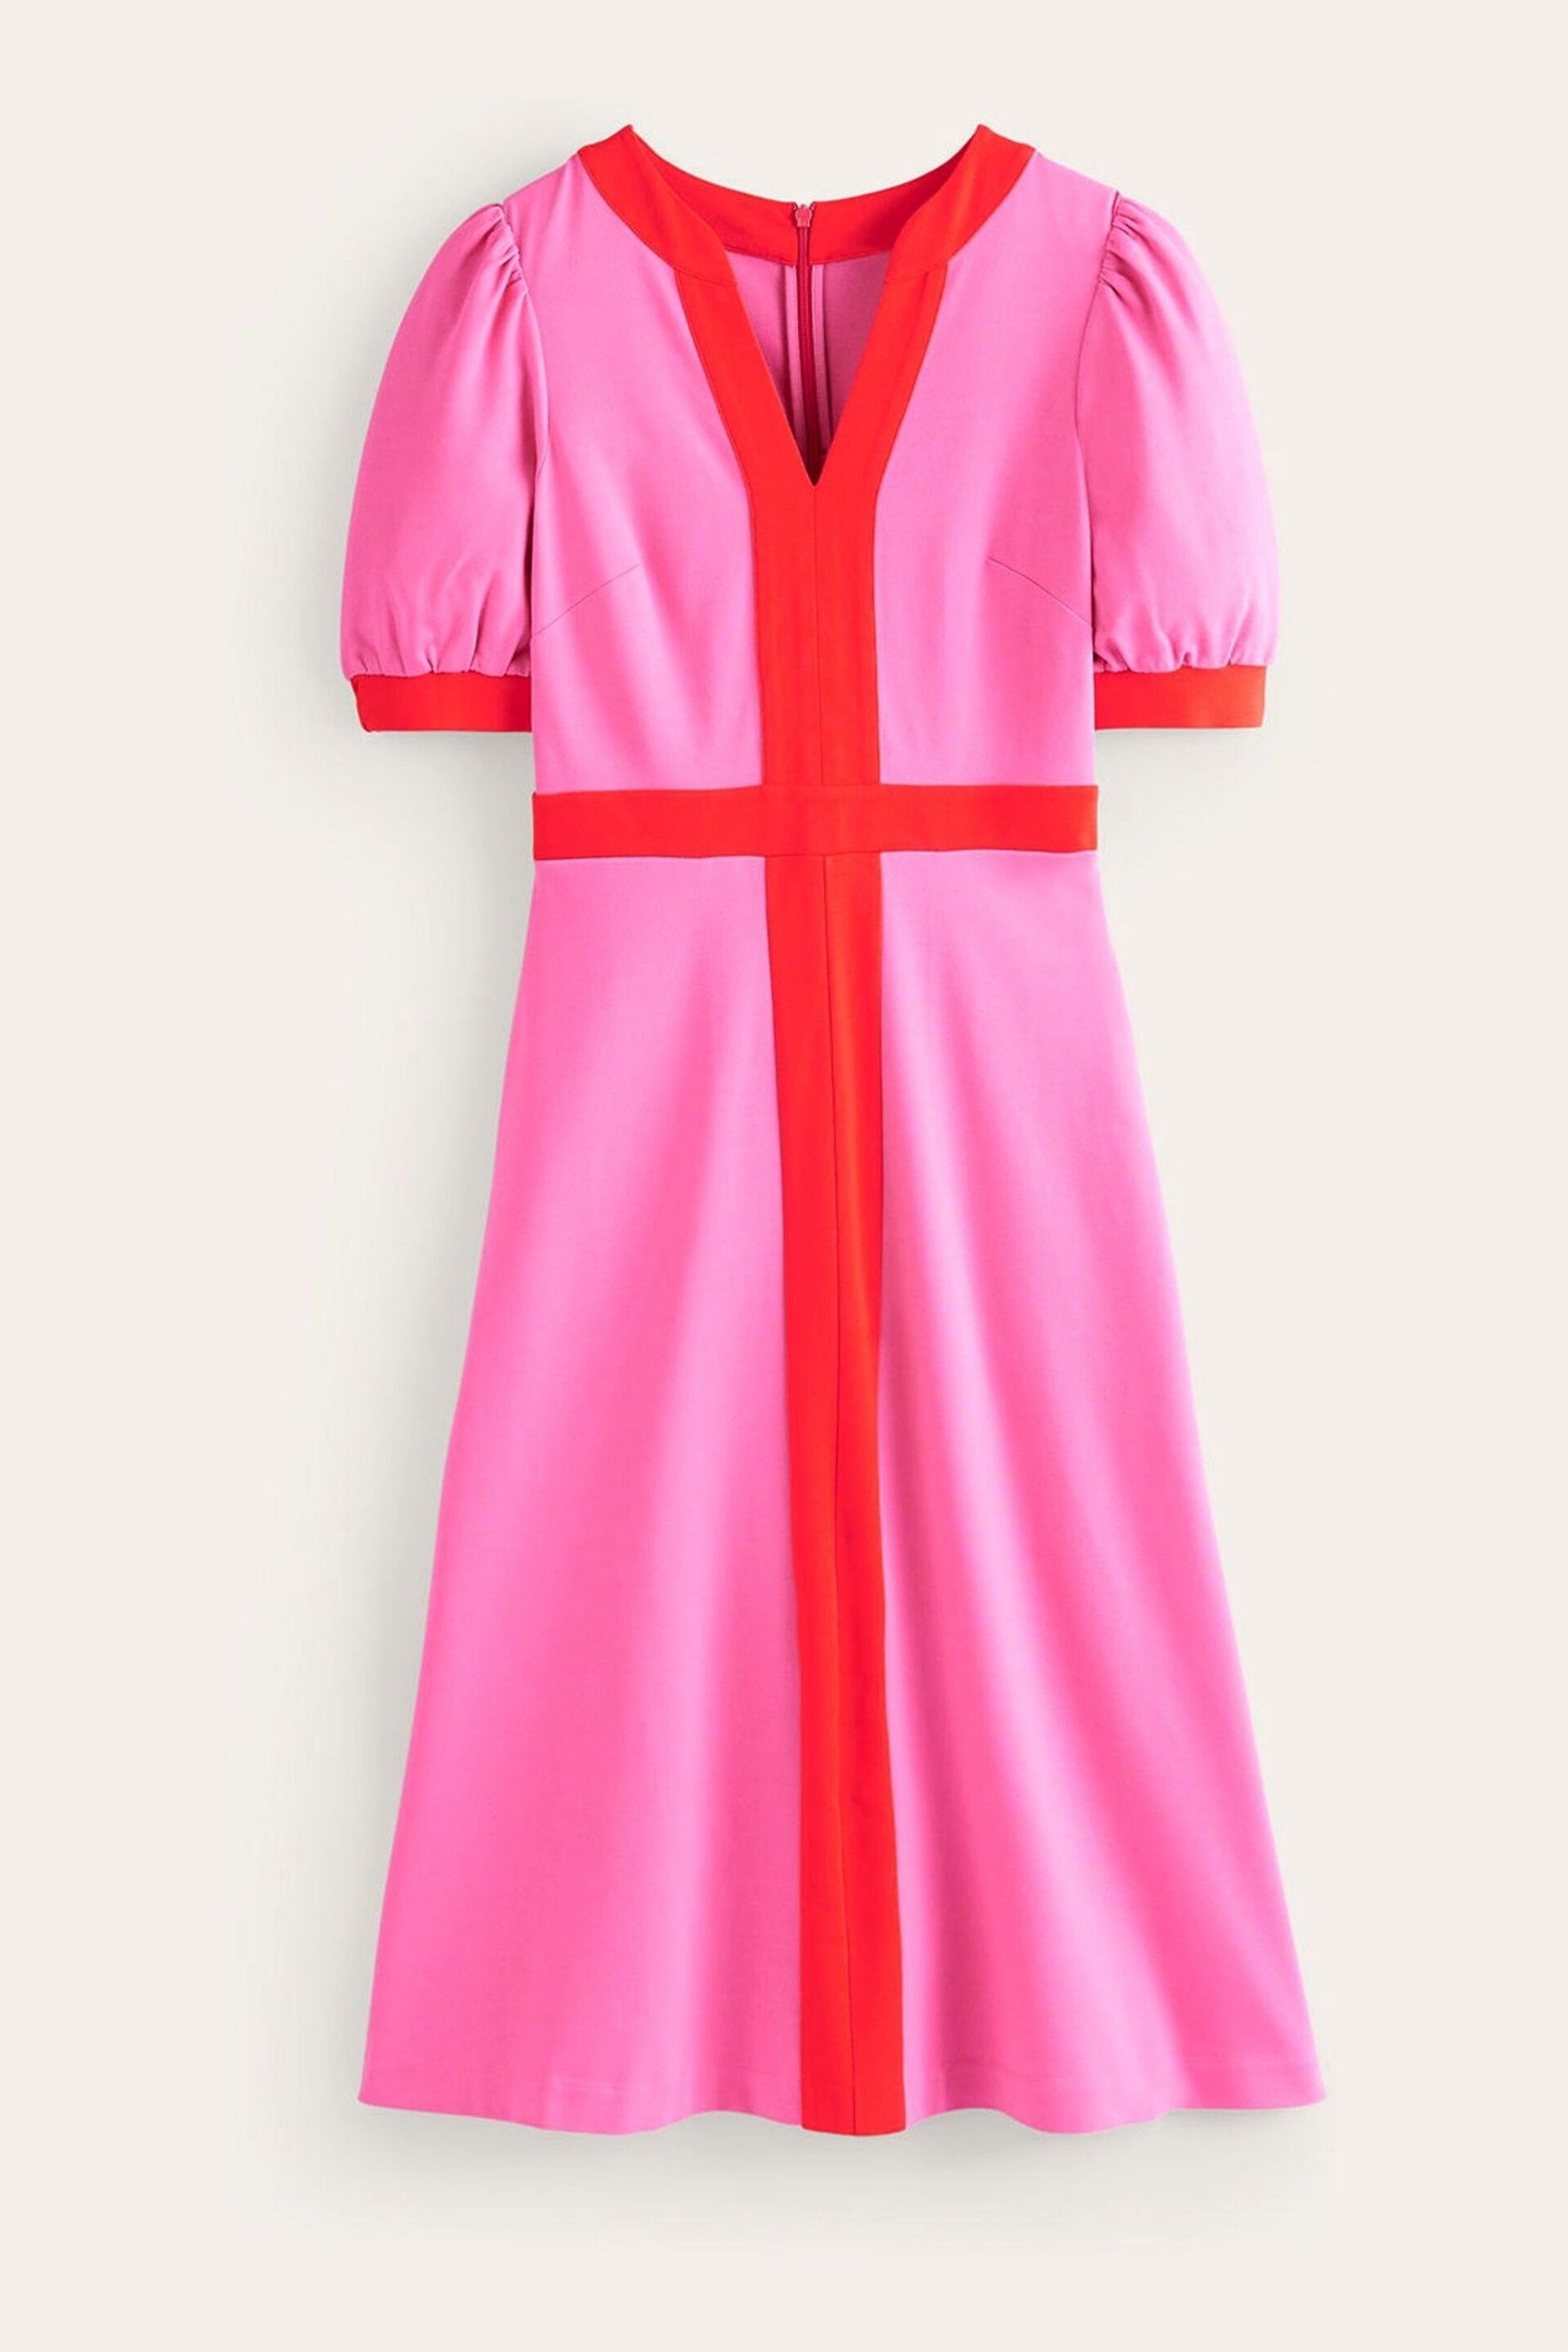 Boden Pink Petite Petra Puff Sleeve Ponte Dress - Image 5 of 5